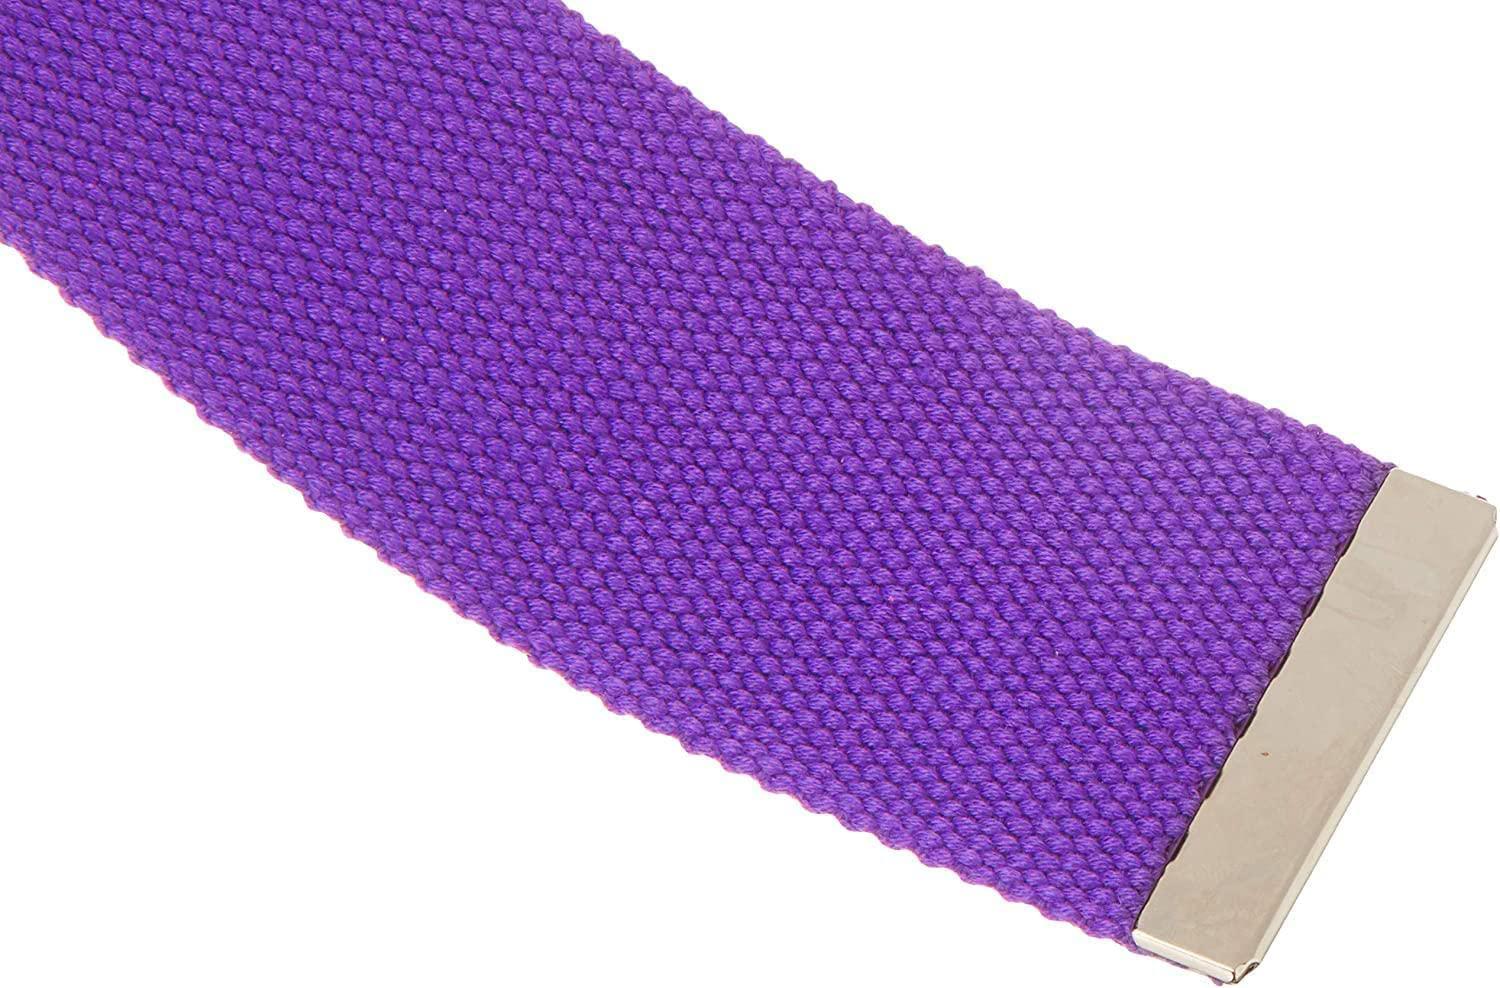 Gait Belt with Plastic Buckle by LiftAid - Transfer and Walking Aid with Belt  Loop Holder for Assisting Therapist, Nurse, Home Care - 60L x 2W (Purple)